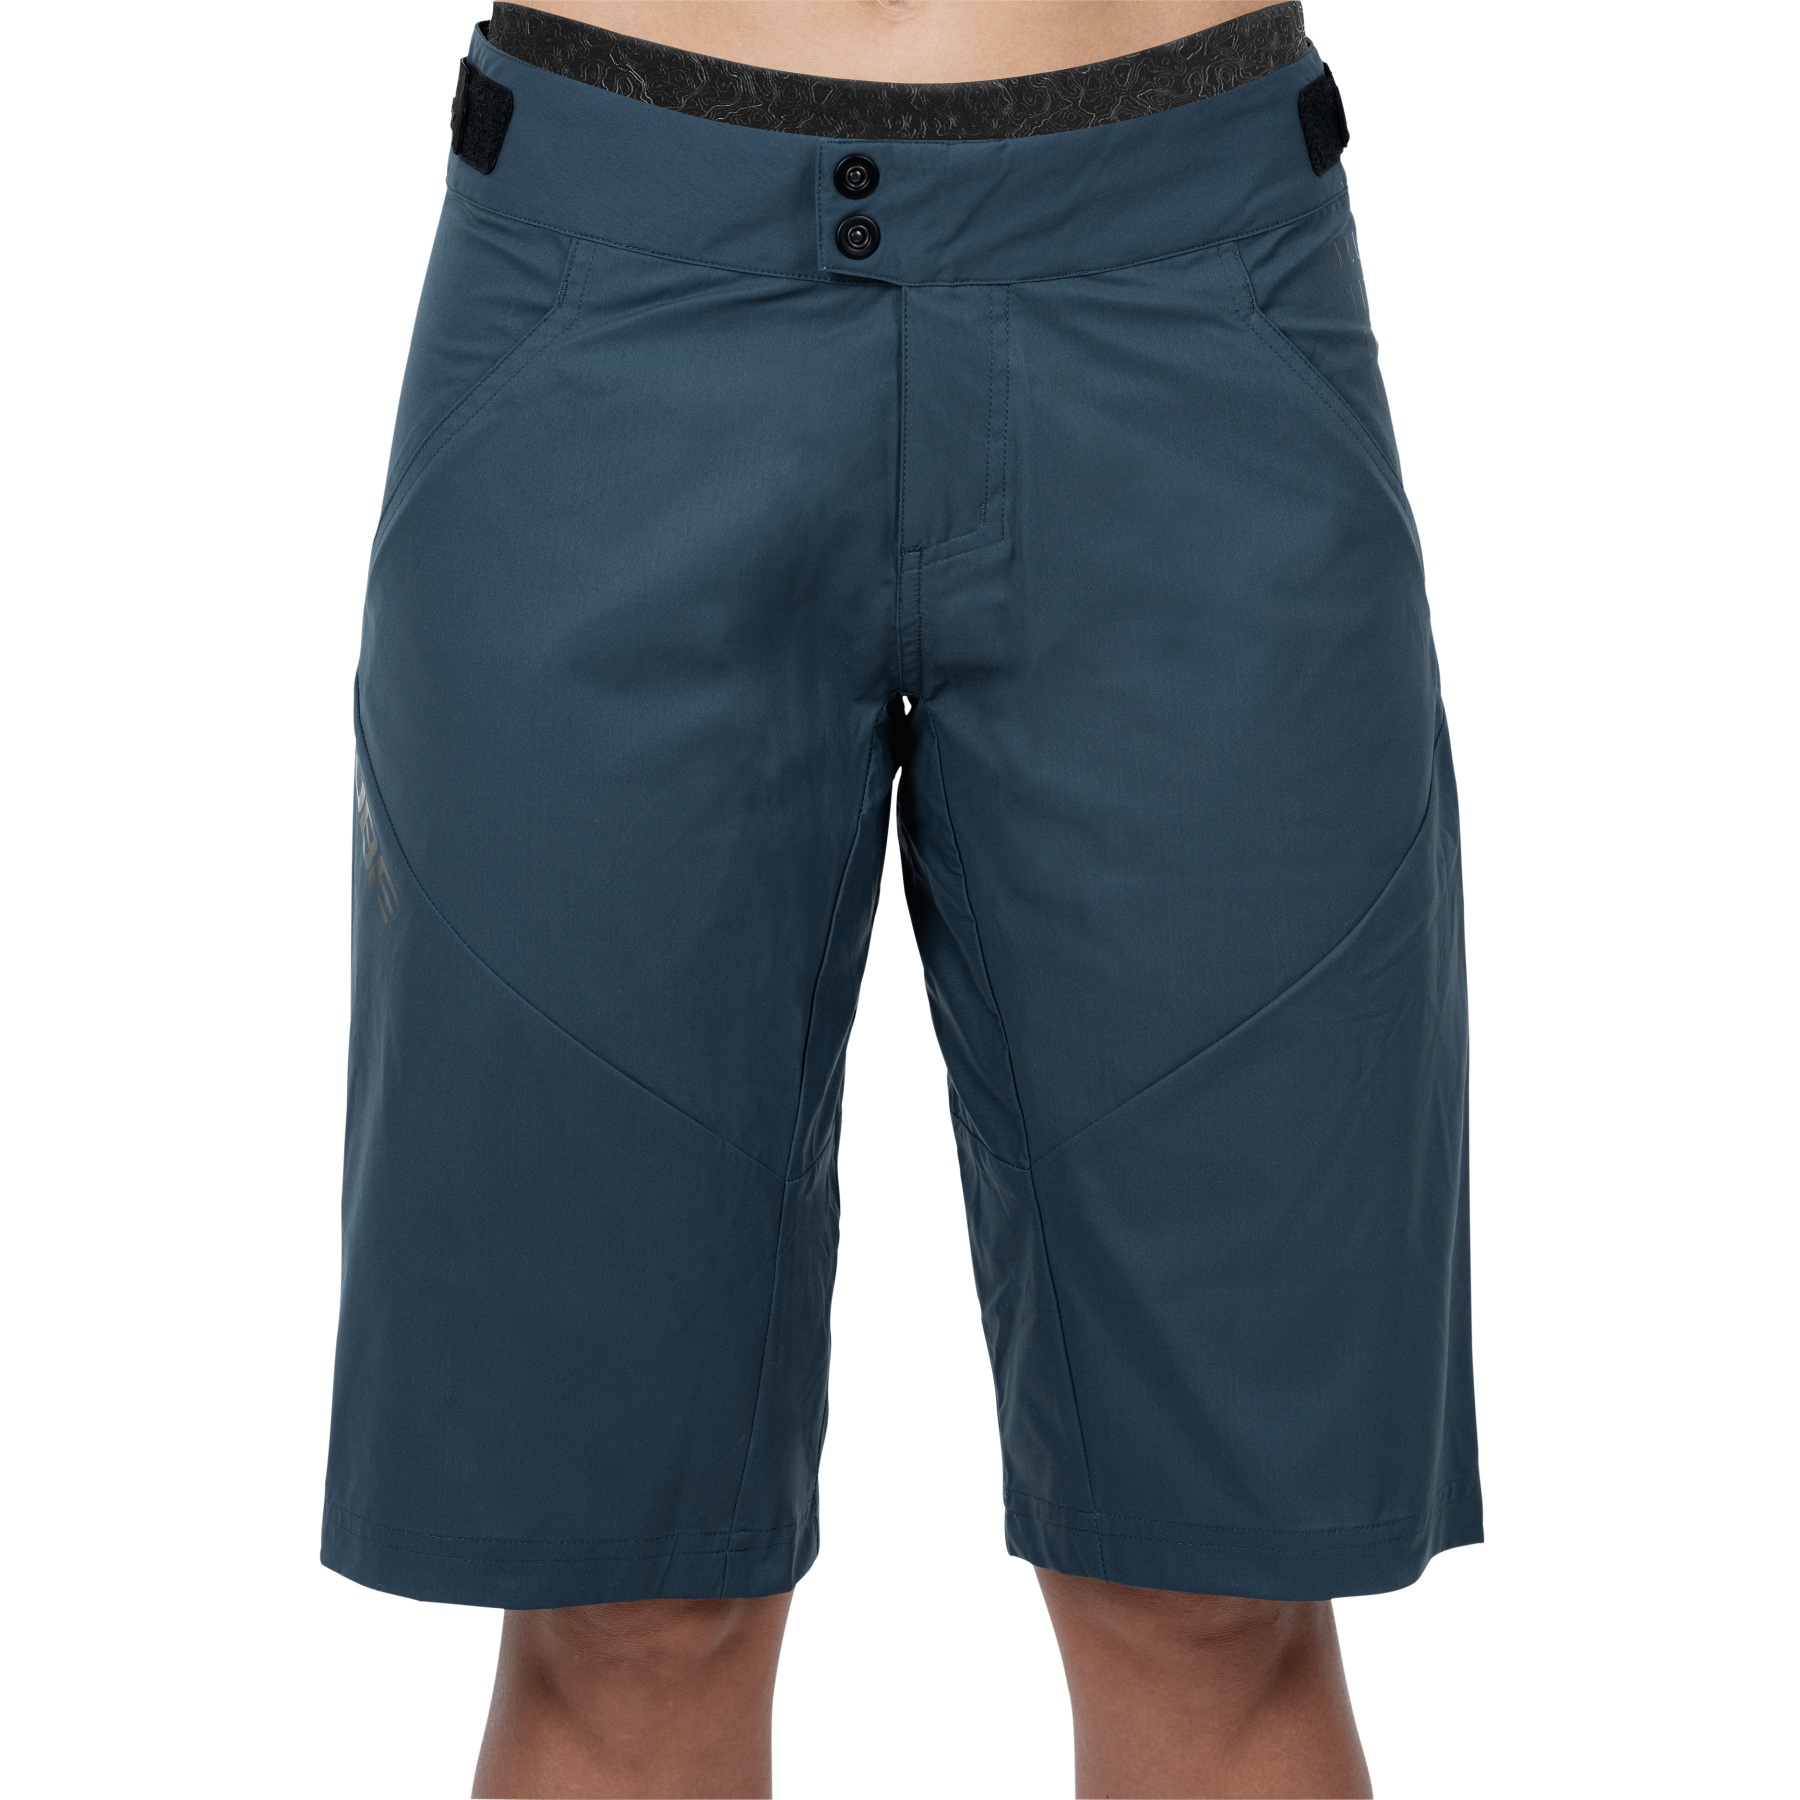 Image of CUBE ATX Baggy Shorts incl. Liner Shorts Women - blue